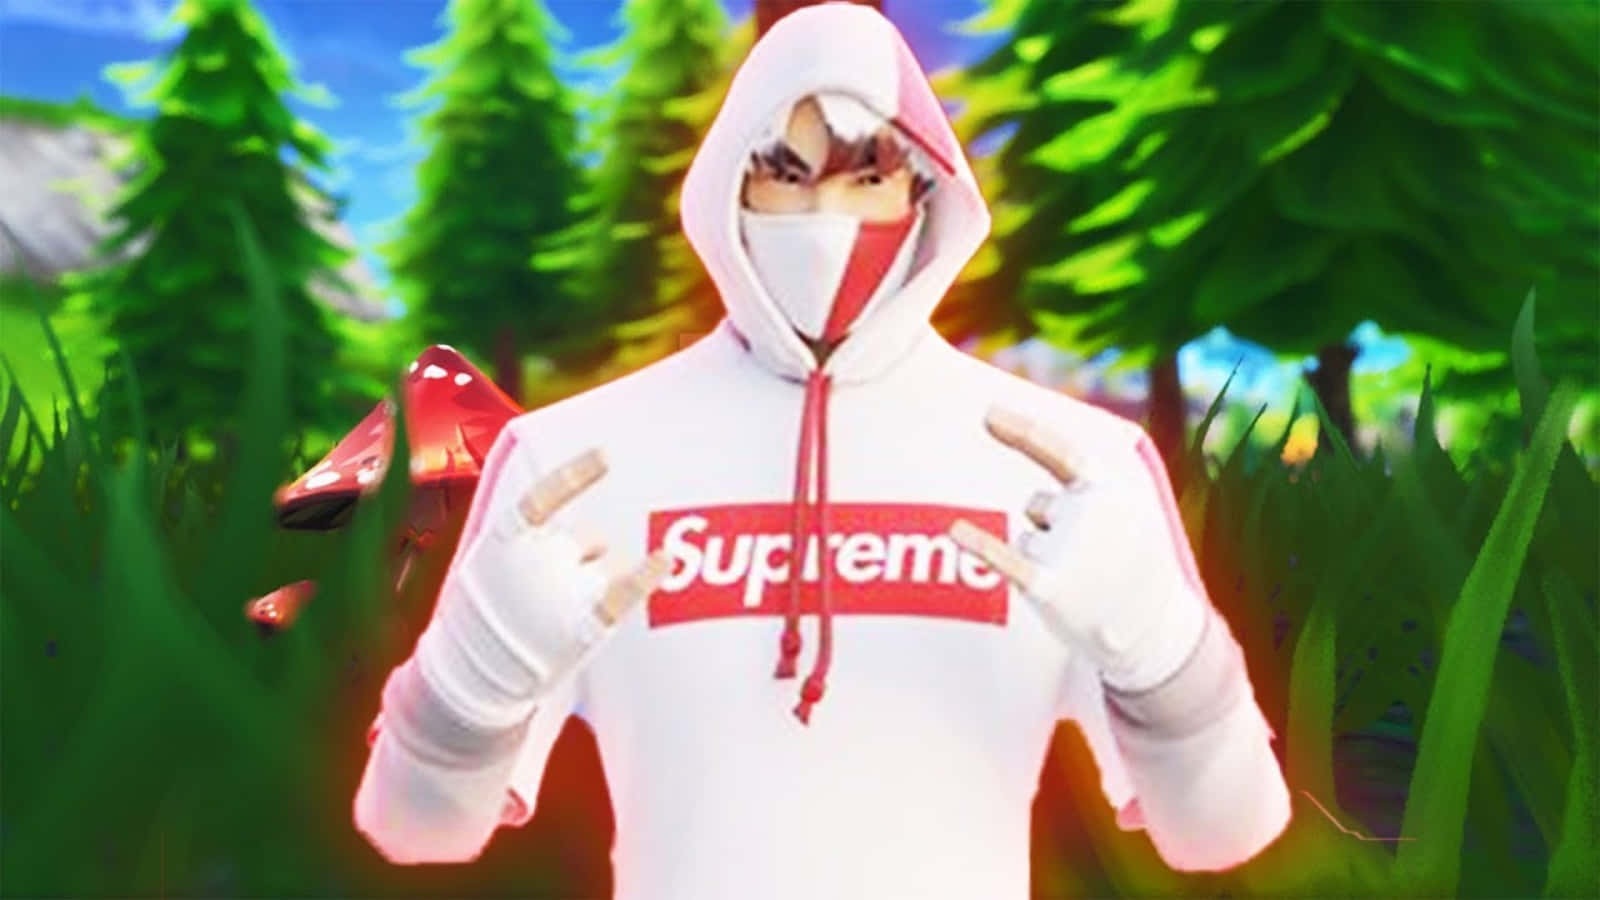 Supreme x Fortnite for the ultimate battle experience. Wallpaper